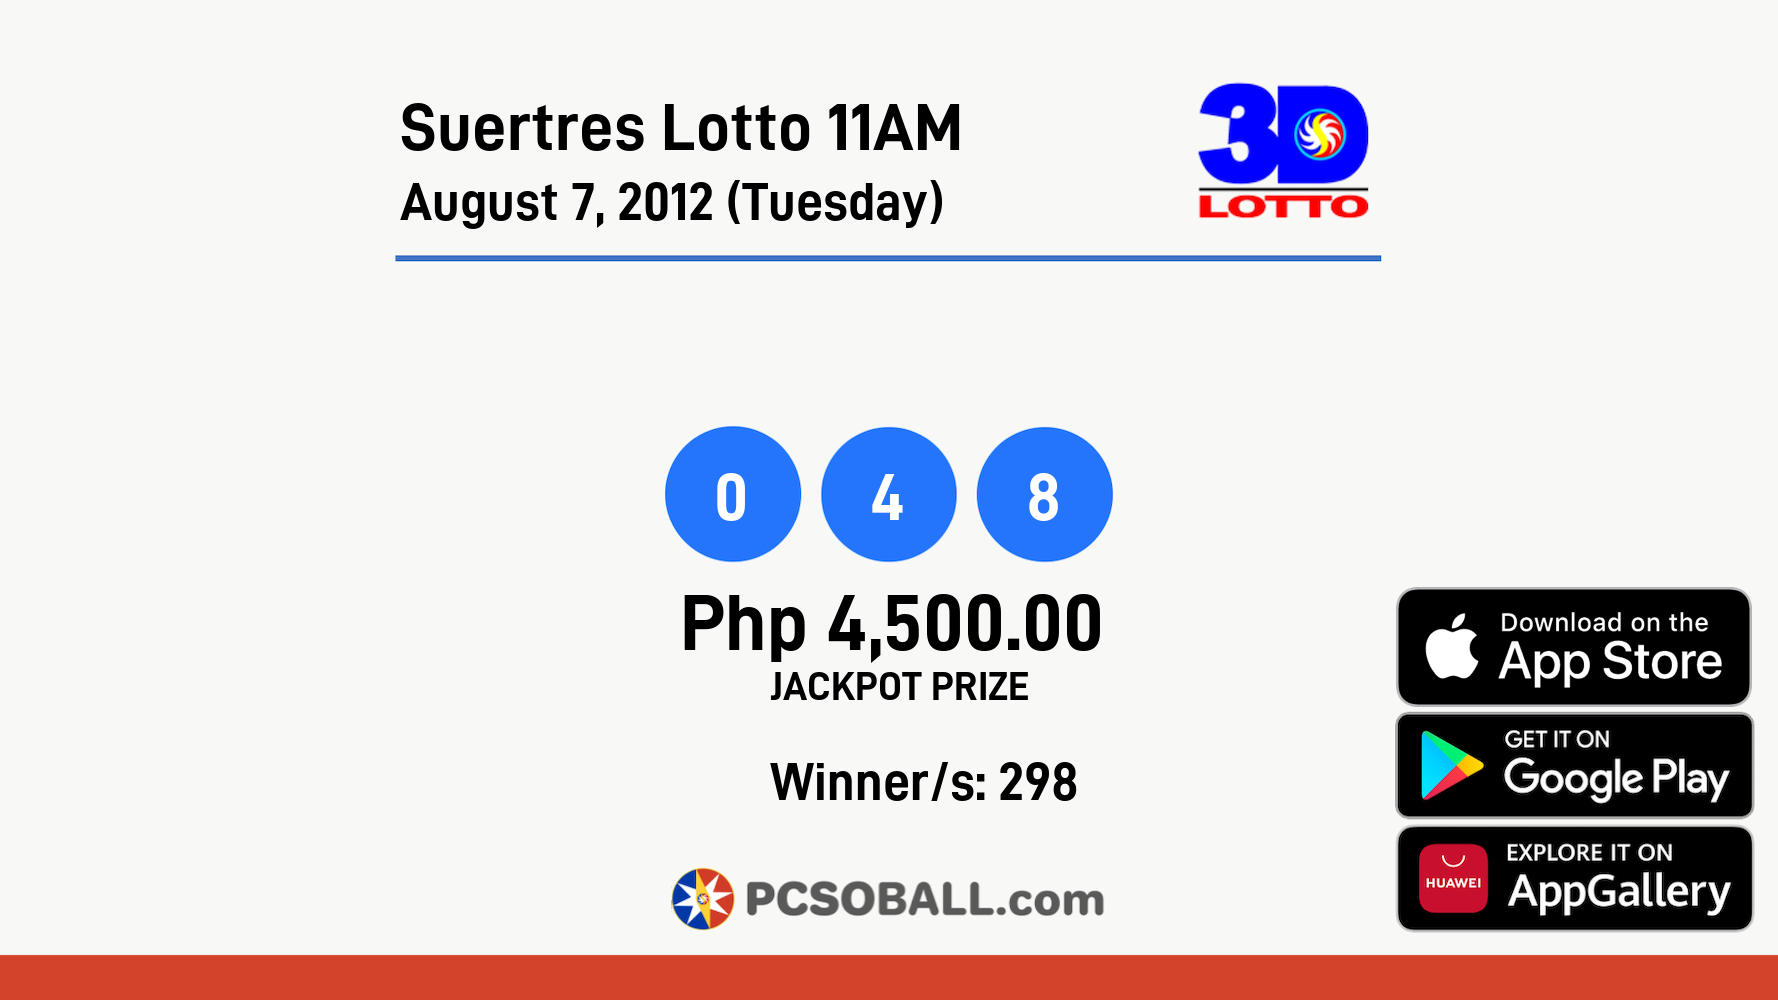 Suertres Lotto 11AM August 7, 2012 (Tuesday) Result